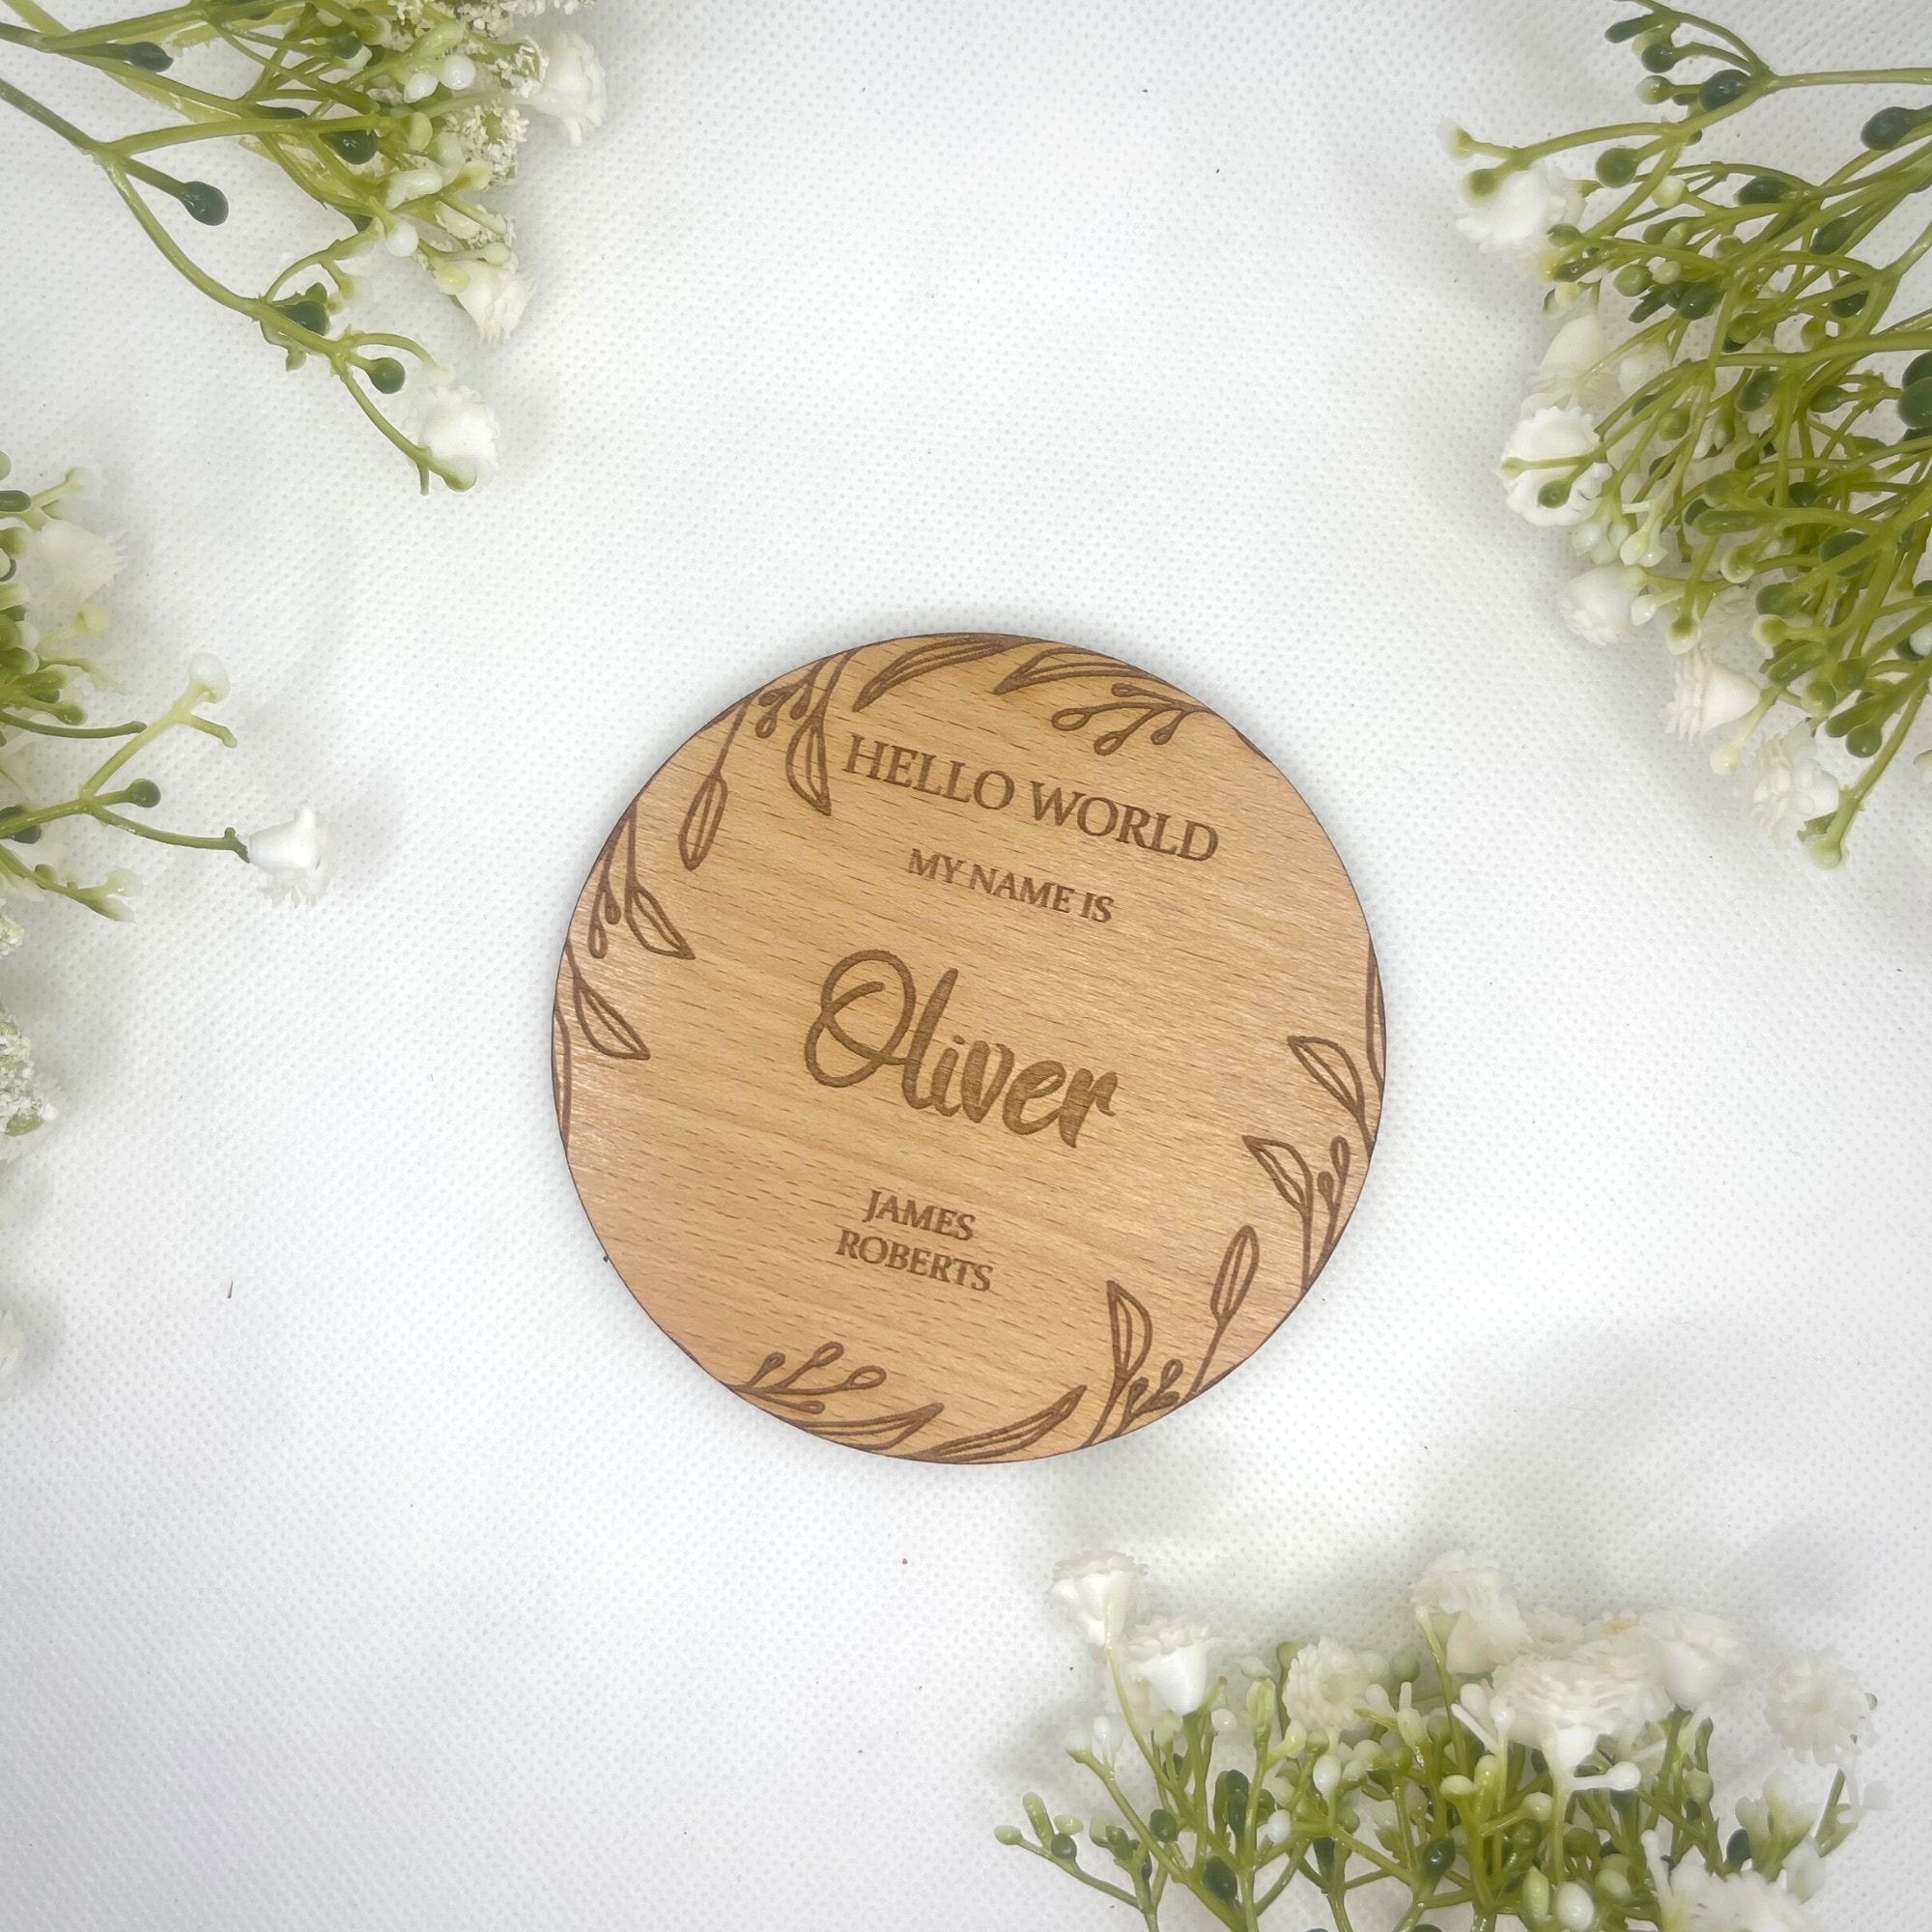 Cherish the moment with our Personalised Baby Announcement Plaque - A beautiful addition to your nursery decor. SIZE: 10x10cm or 15x15cm (approx) Thickness: 4mm